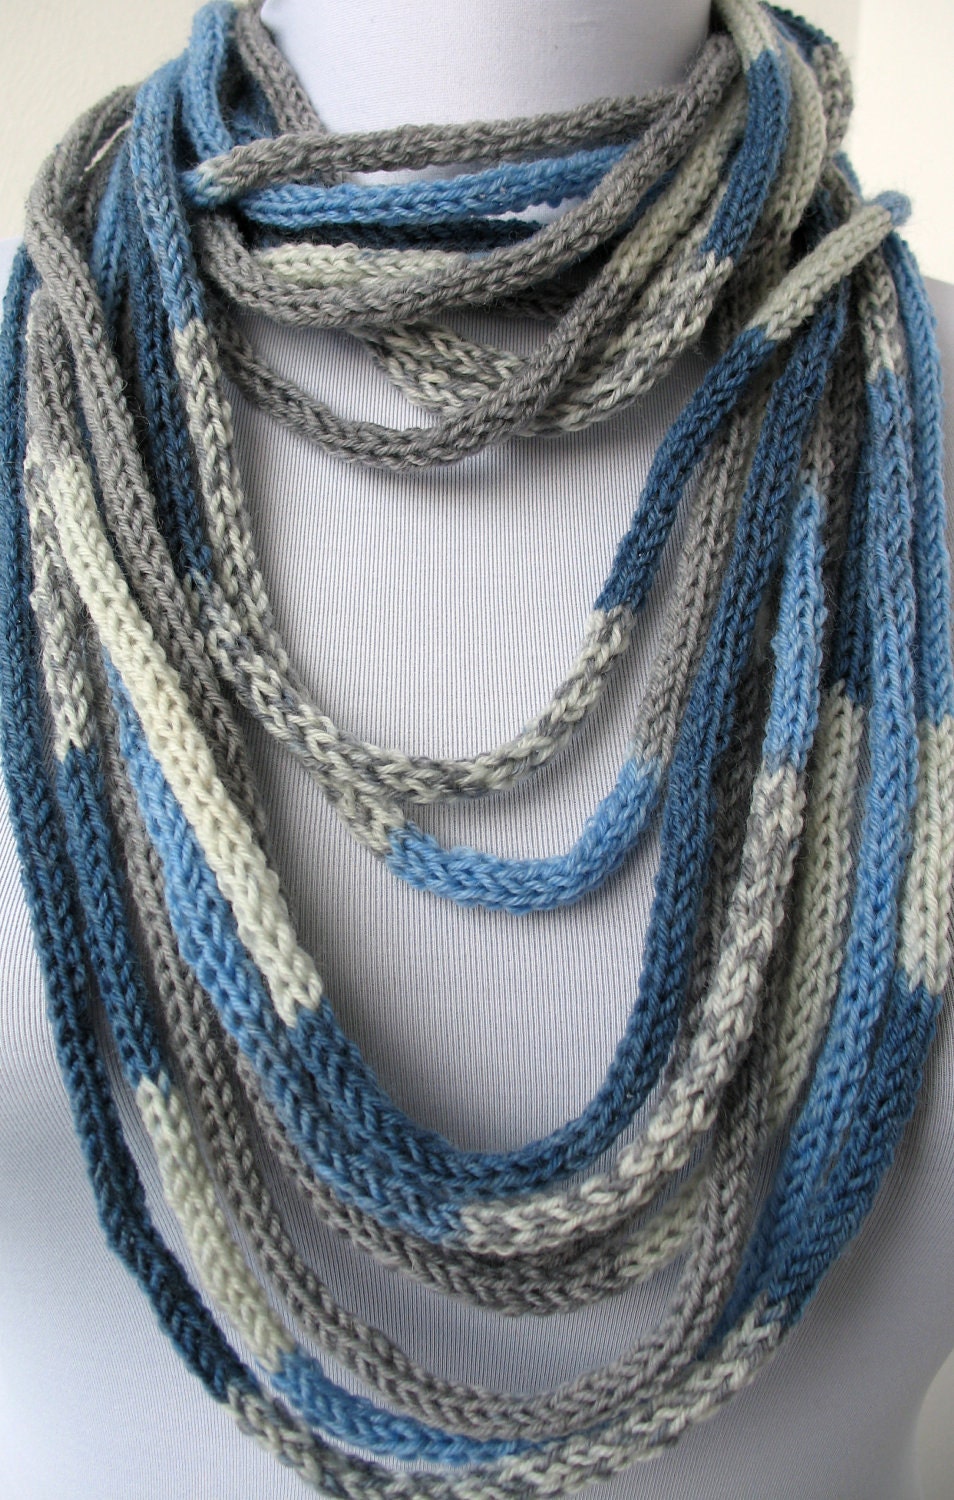 50% OFF SALE -Knit Scarf Necklace - loop scarf -infinity scarf -neck warmer -knit scarflette -in gray and blue tones (WAS 33) - DreamList